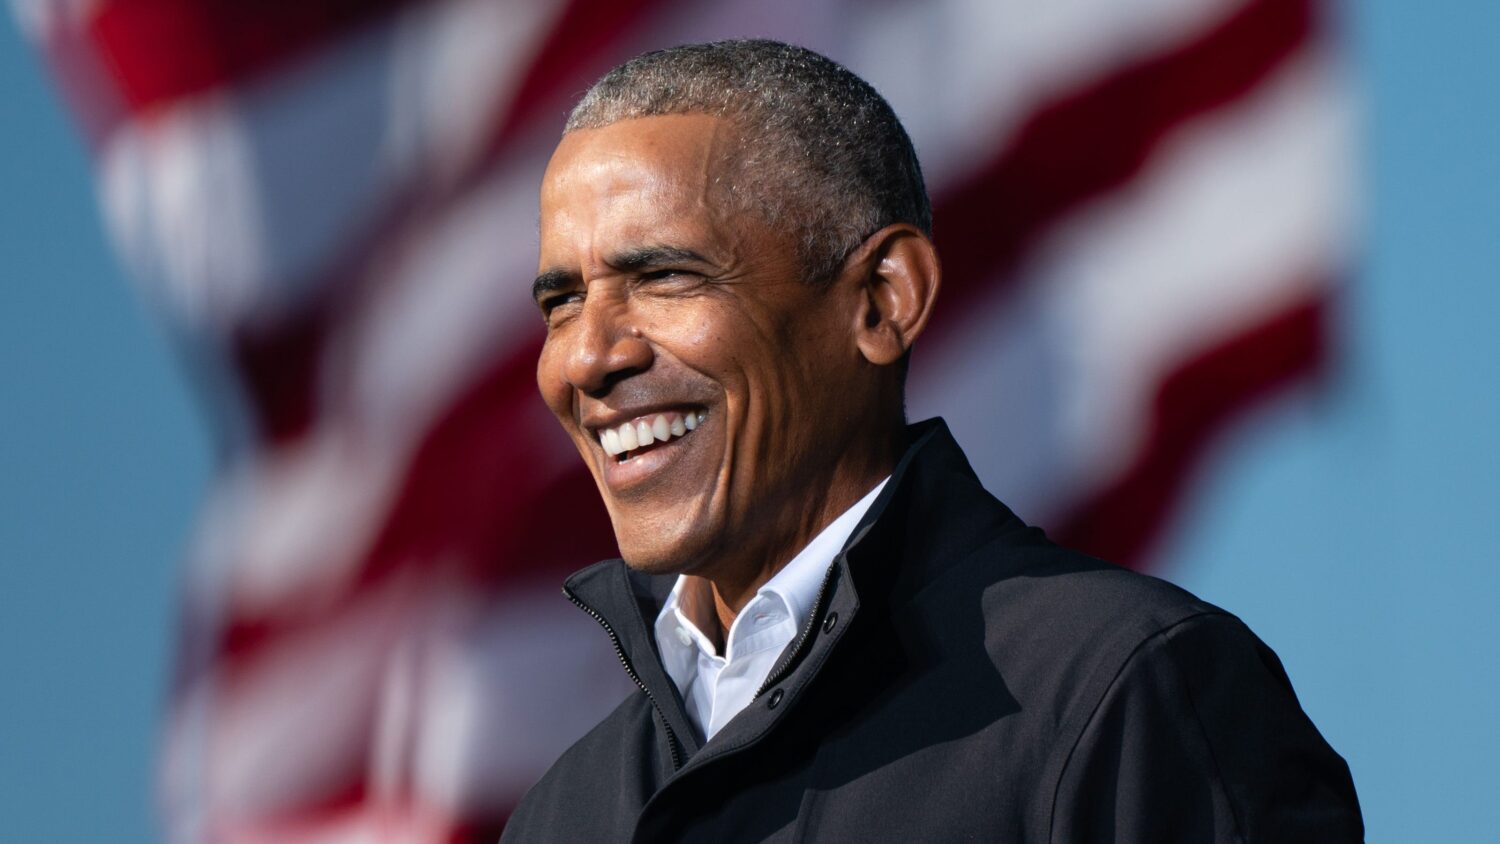 Obama Features Wizkid, Tems On His Favourite Songs Of 2020 List